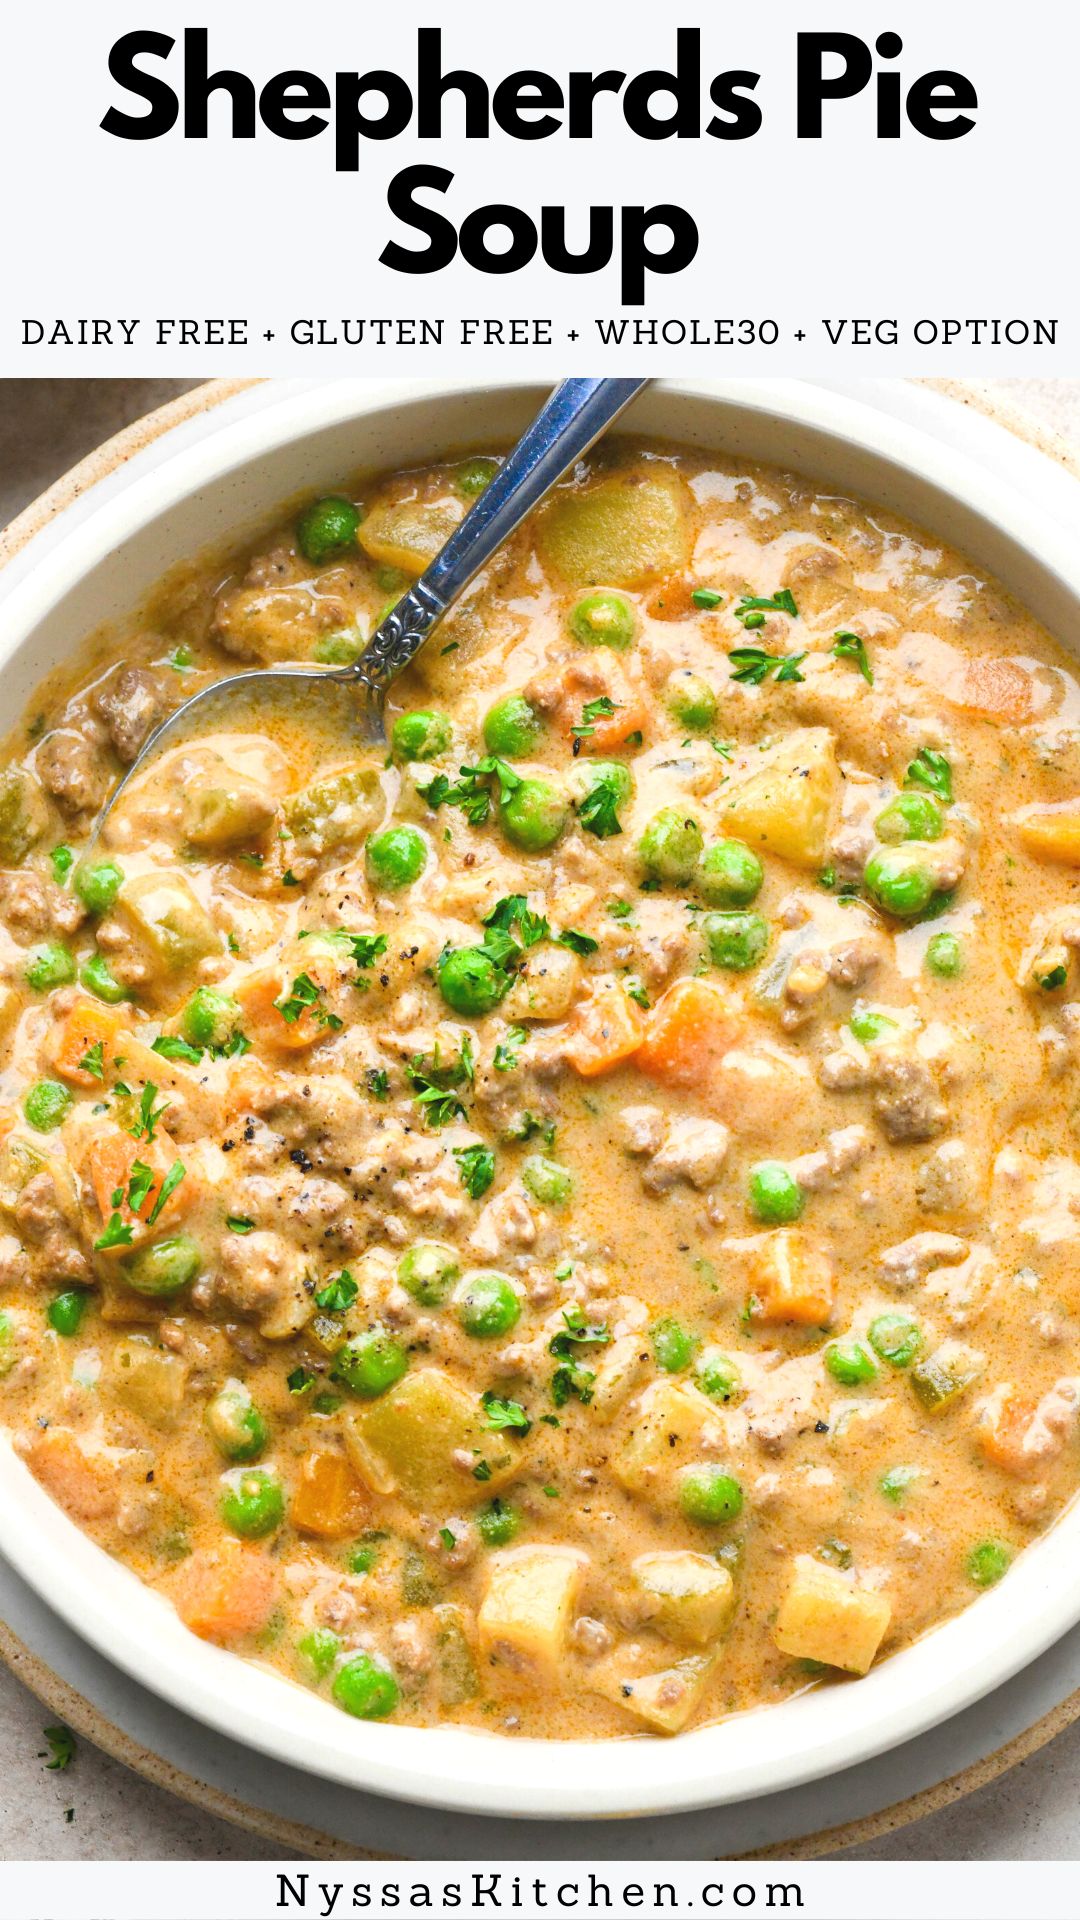 This comforting shepherds pie soup is a delicious, healthy twist on a classic casserole dish. A rich and flavorful recipe that is easy to make and perfect for your next family dinner! Made with tons of veggies, ground beef, and a creamy cashew cream base for a comfort food meal you'll want to make again and again! Gluten free, dairy free, Whole30, paleo, and easily adapted to be vegan.